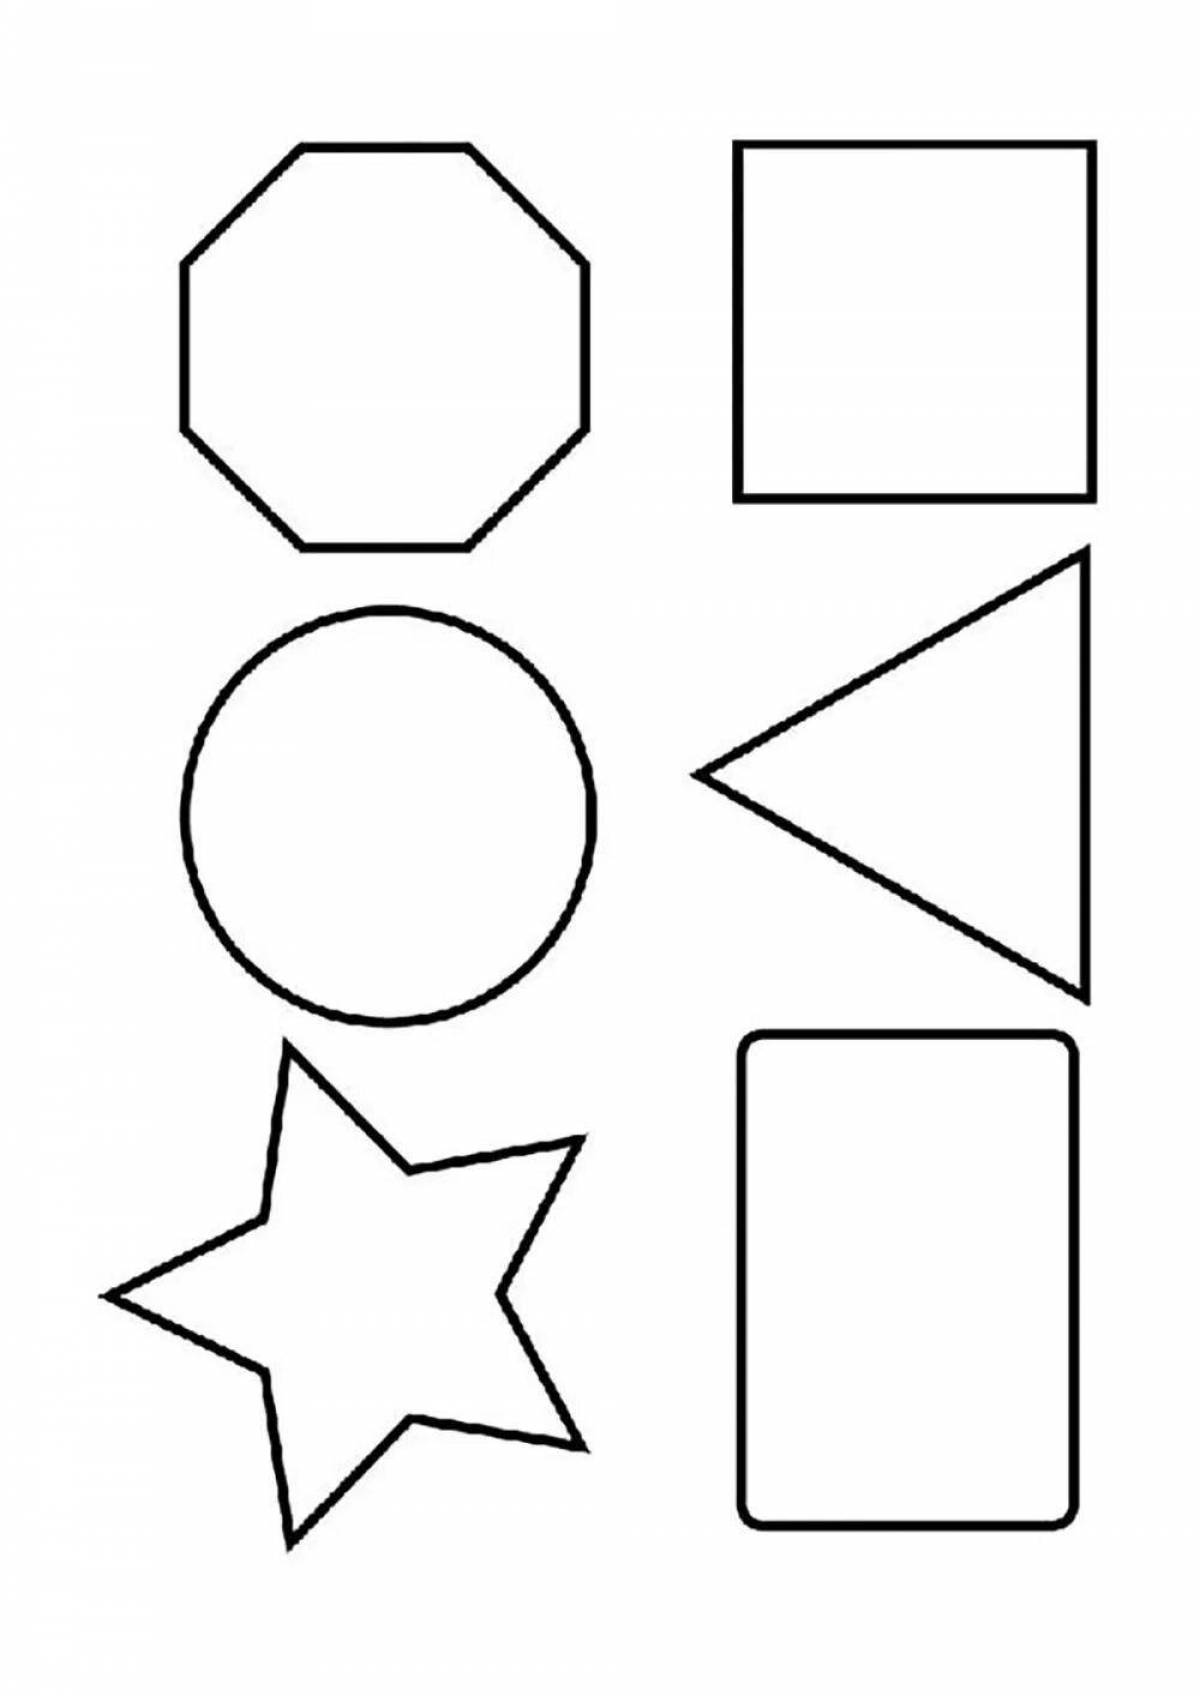 Creative geometry coloring page for little ones